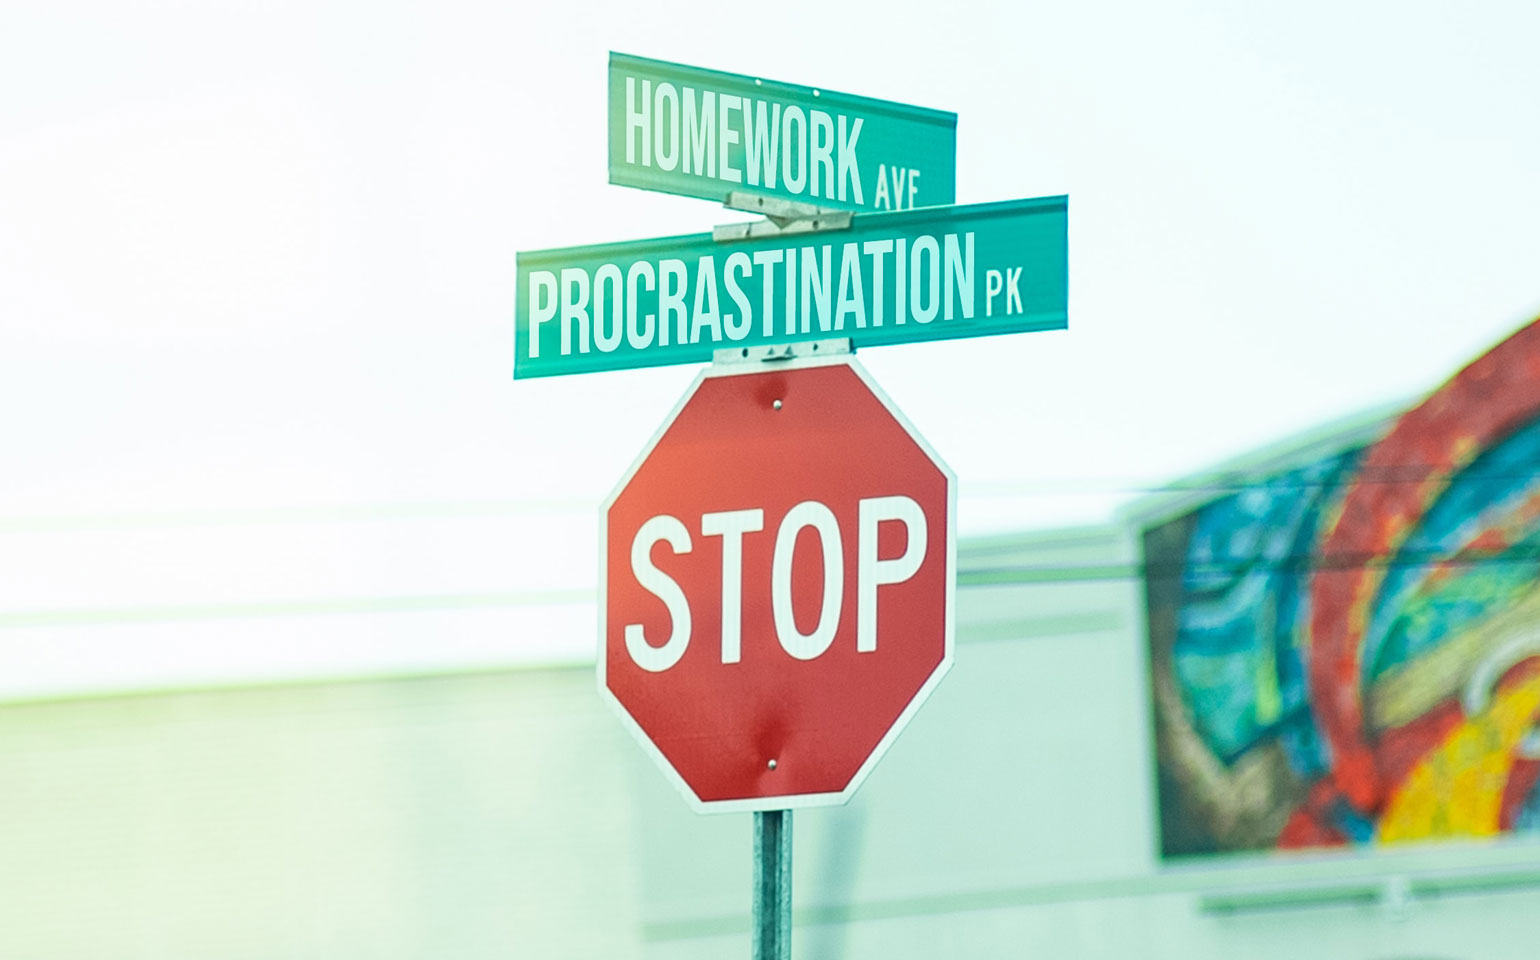 Homework Ave and Procrastination Pk road sign sitting on a stop sign.